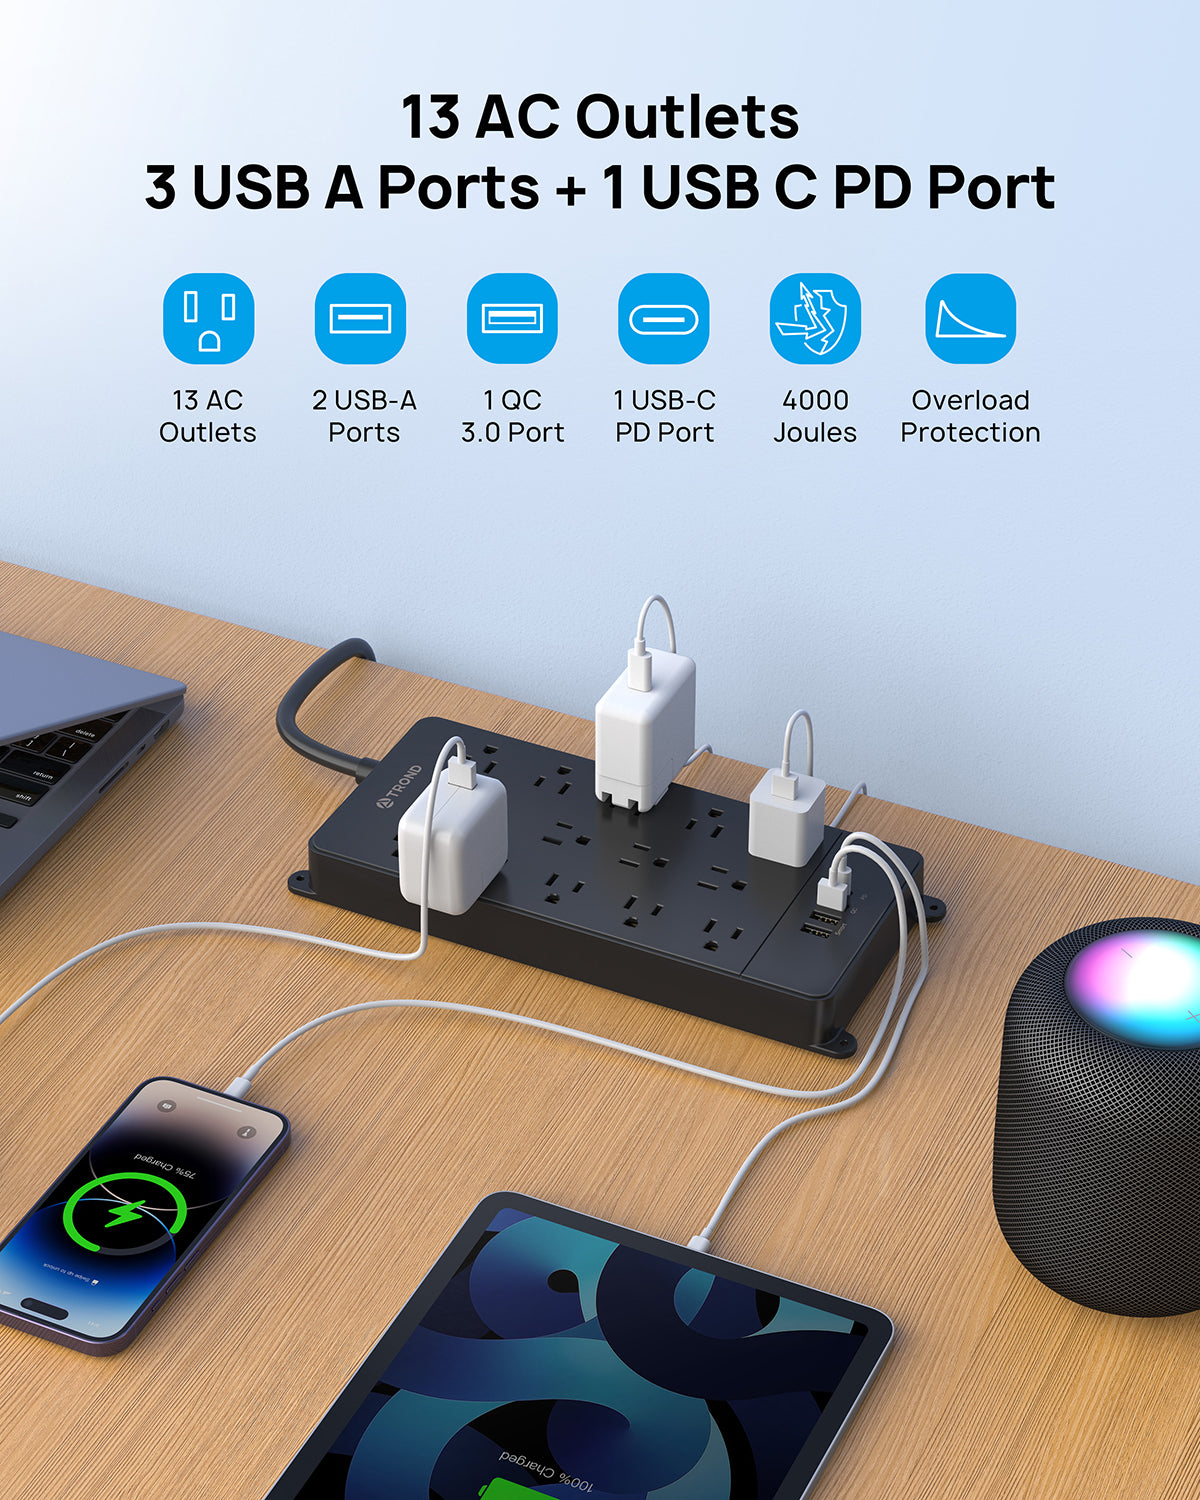 13-Outlet Surge Protector w/ 4 USB Ports, 4000J